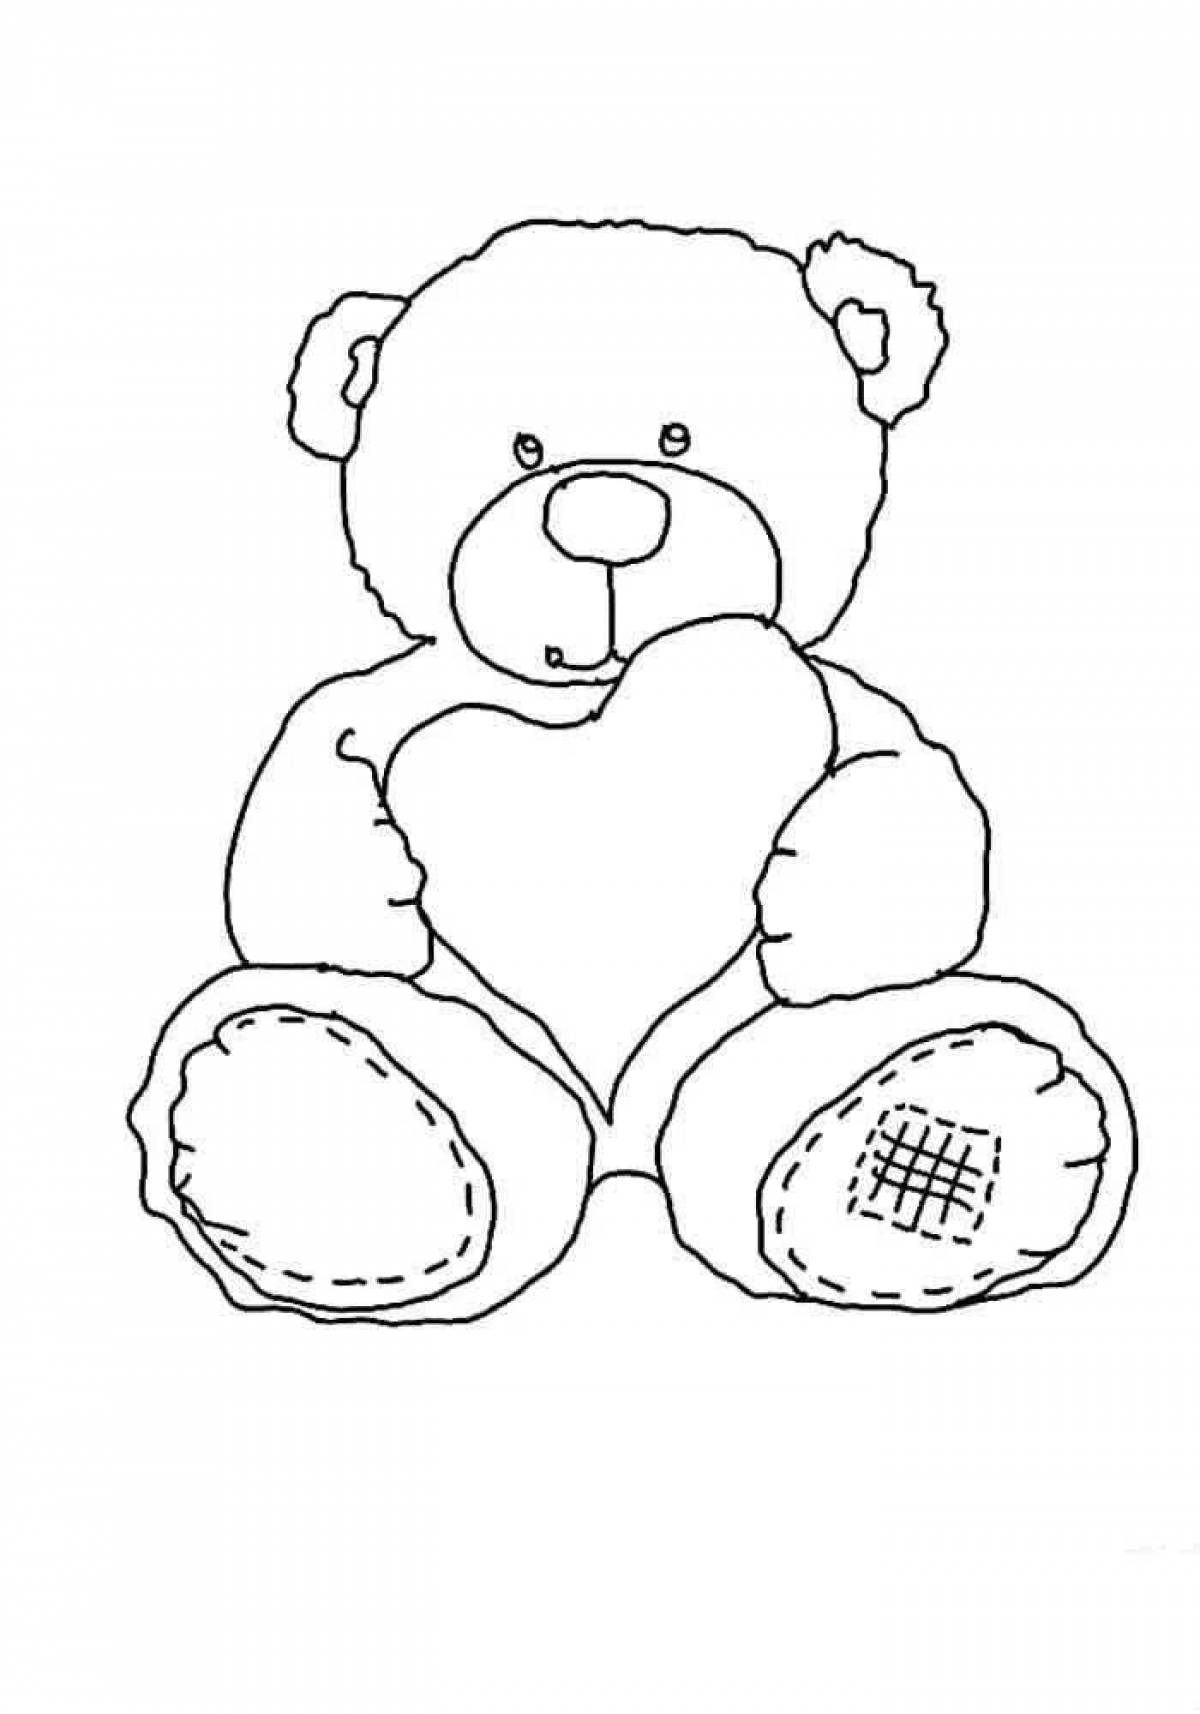 Fluffy teddy coloring book